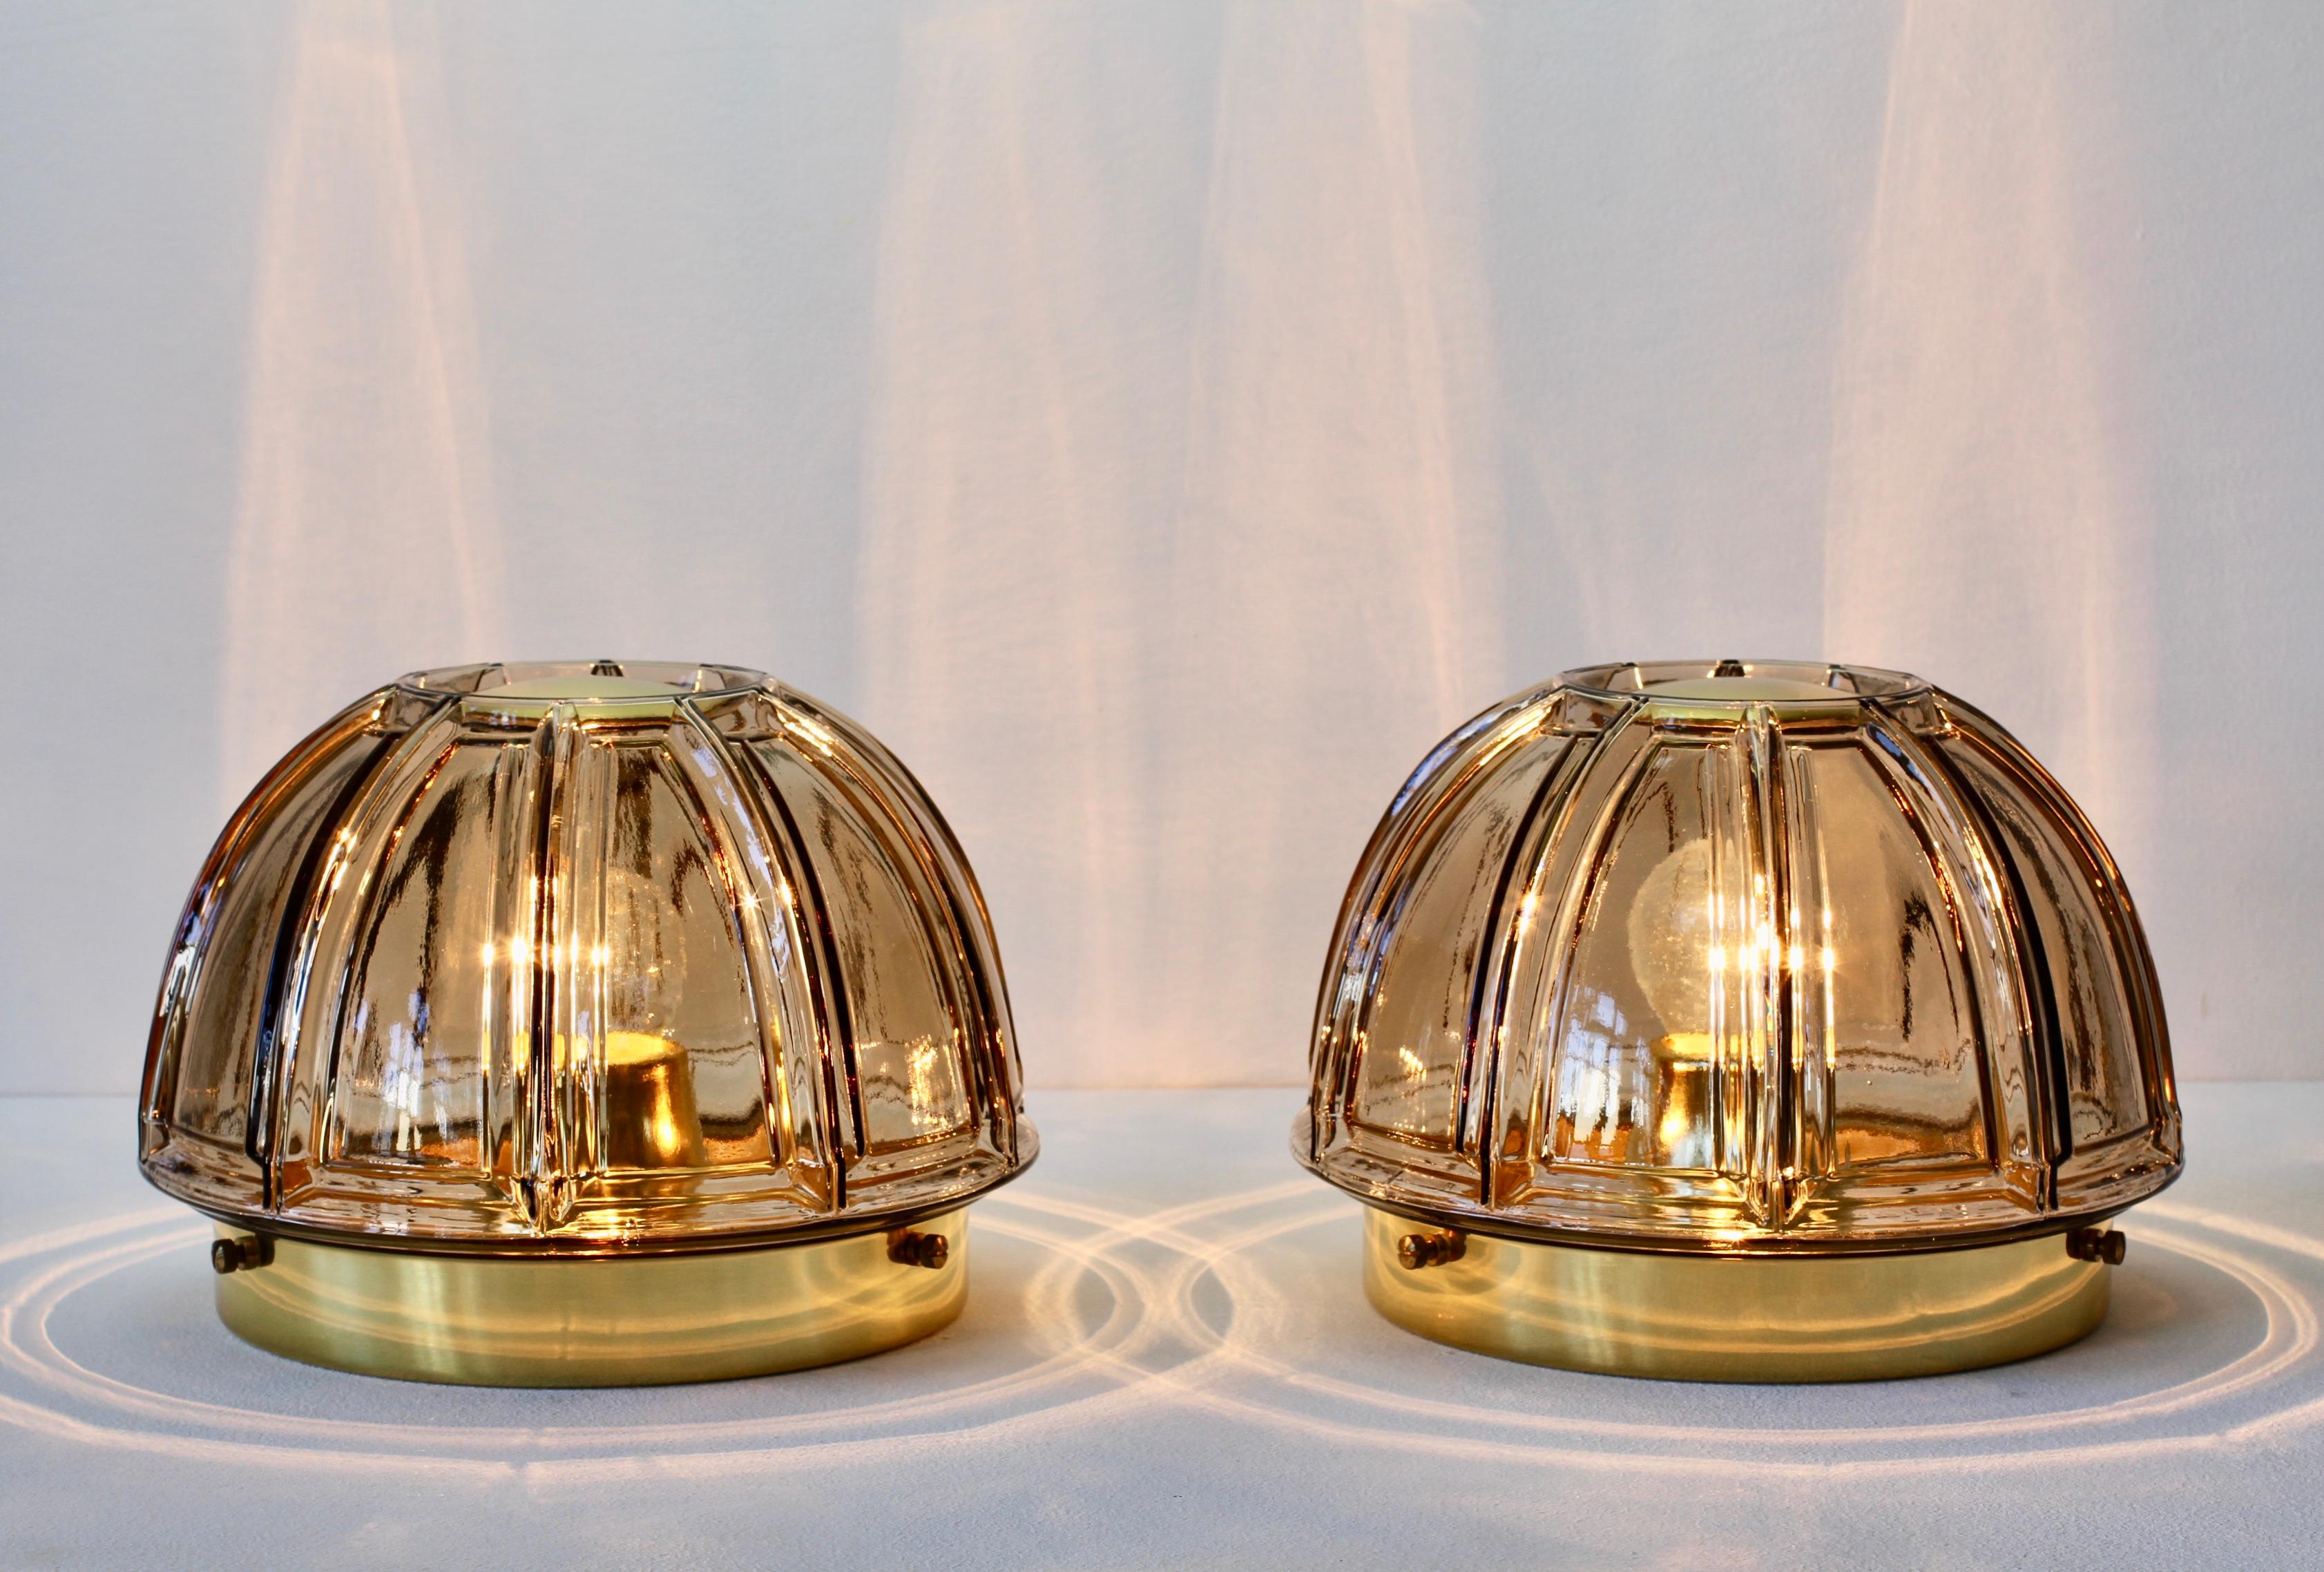 Limburg Pair of Topaz Toned Textured Glass Flush Mount Wall Lights or Sconces For Sale 3